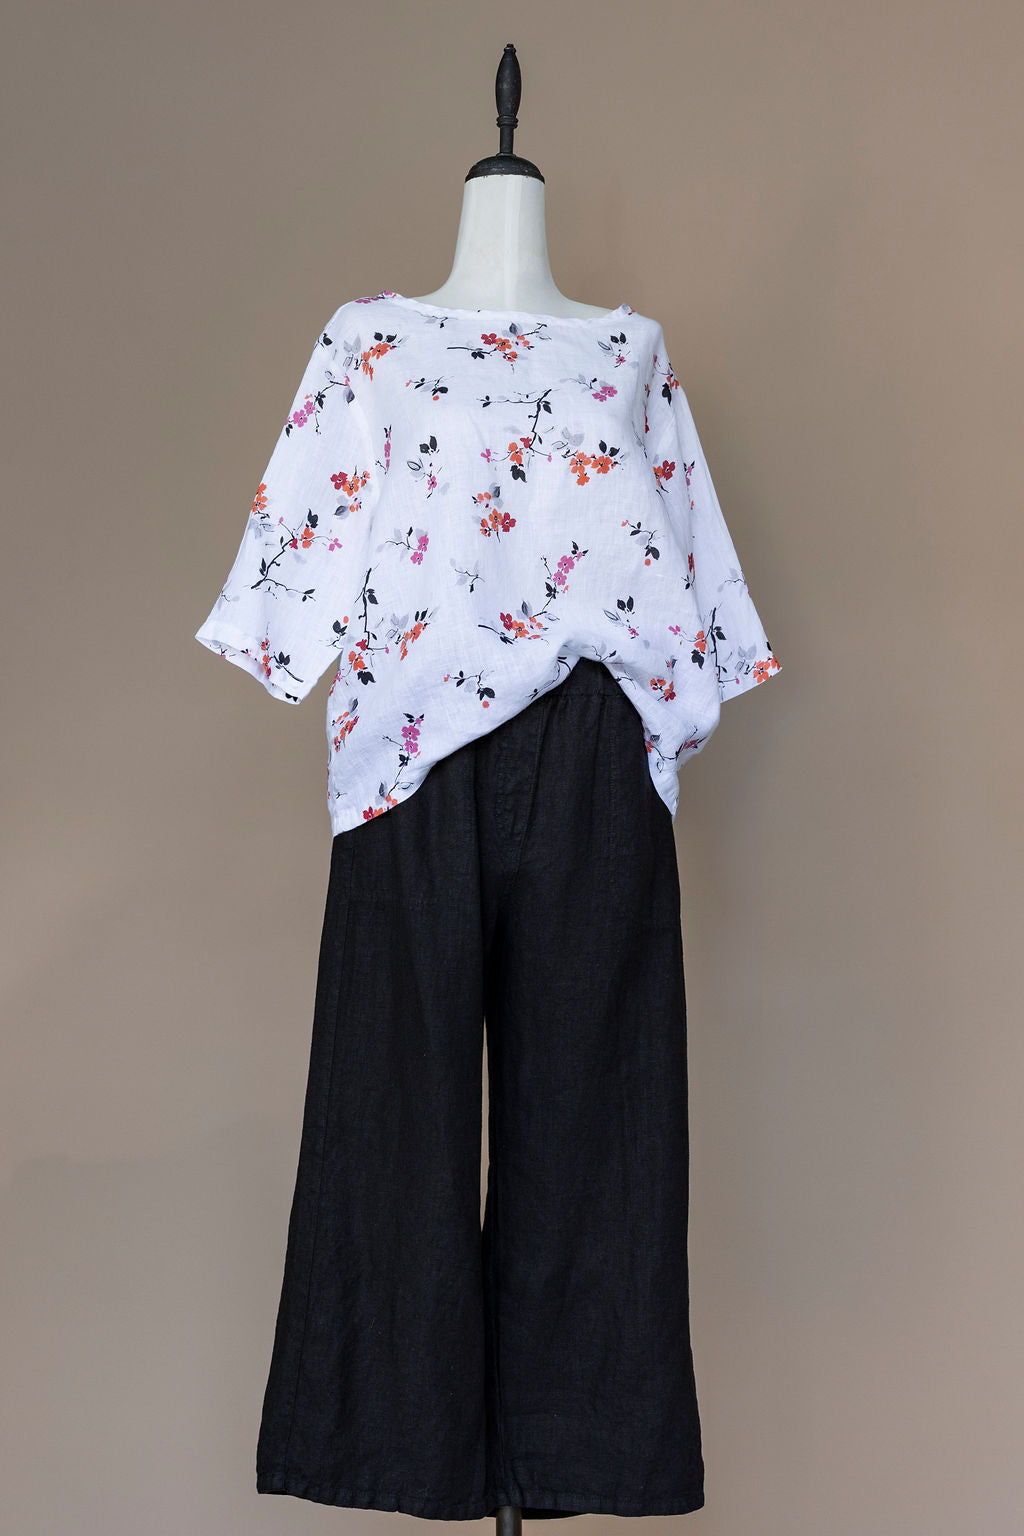 Cut Loose - Linen Elbow Sleeves Top - Cherry Blossom White